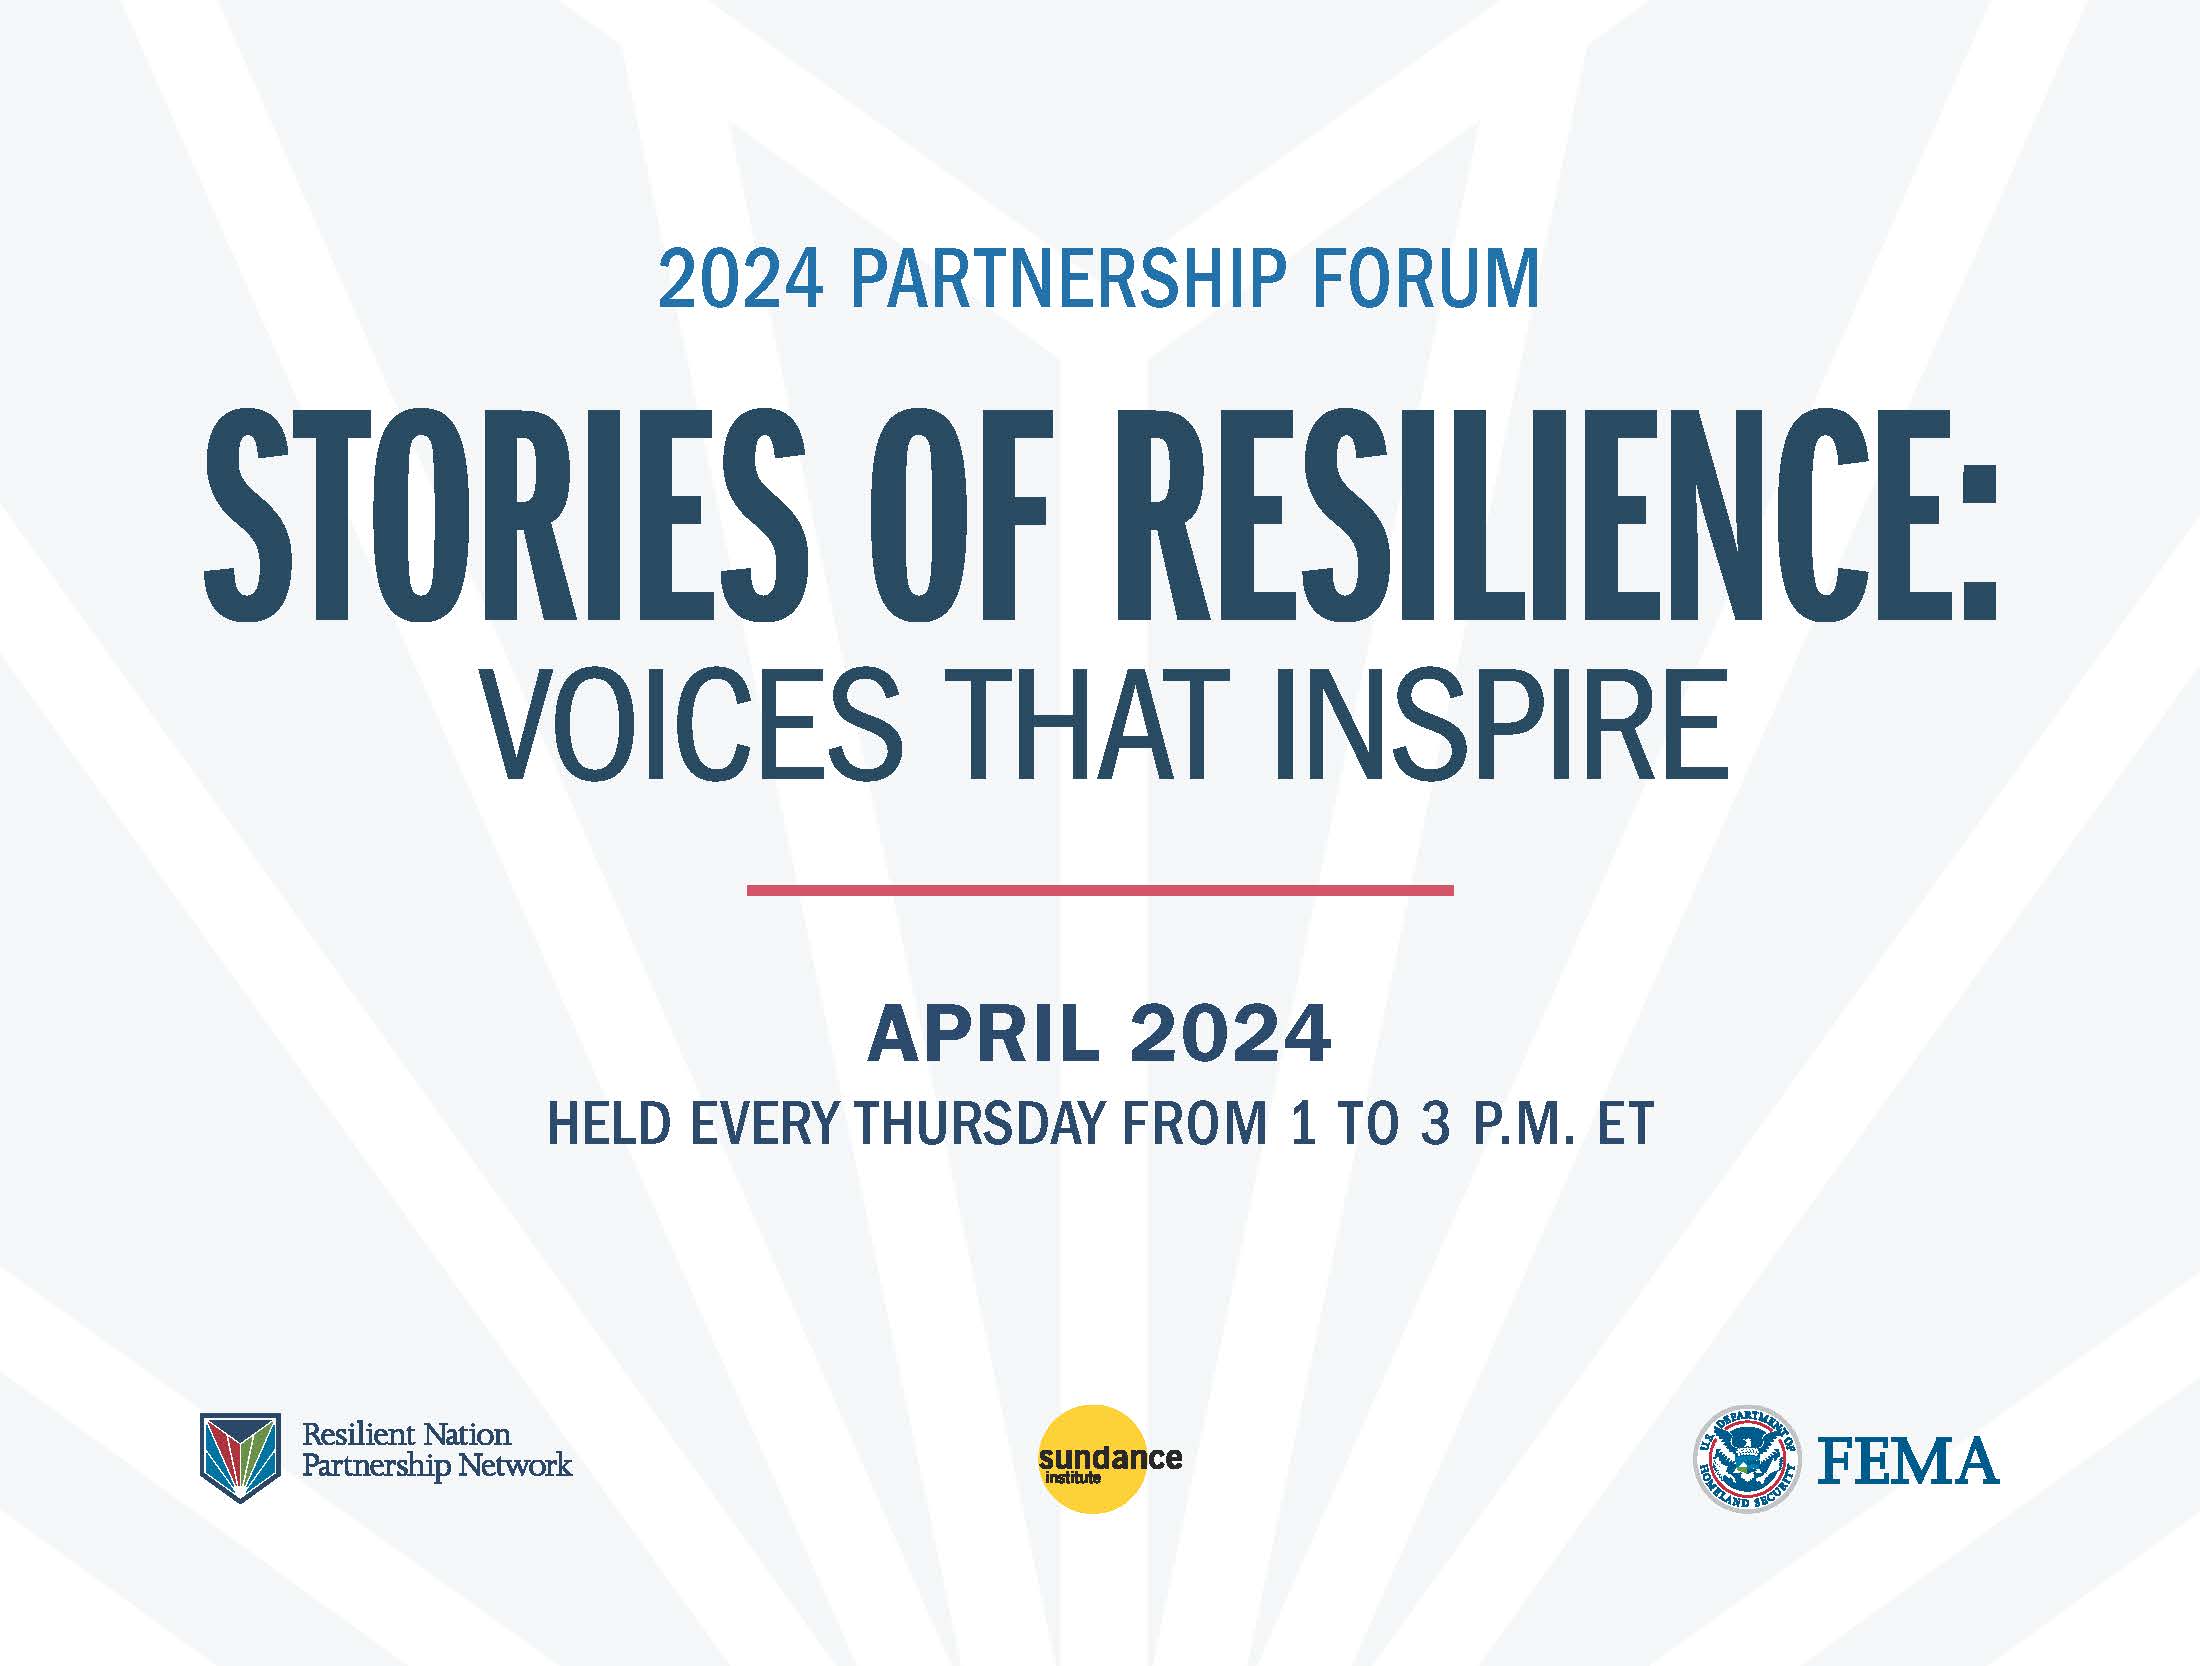 Blue and white graphic with text that reads, "2024 Partnership Forum Stories of Resilience: Voices that Inspire. April 2024 Held every Thursday from 1 to 3 p.m. ET"